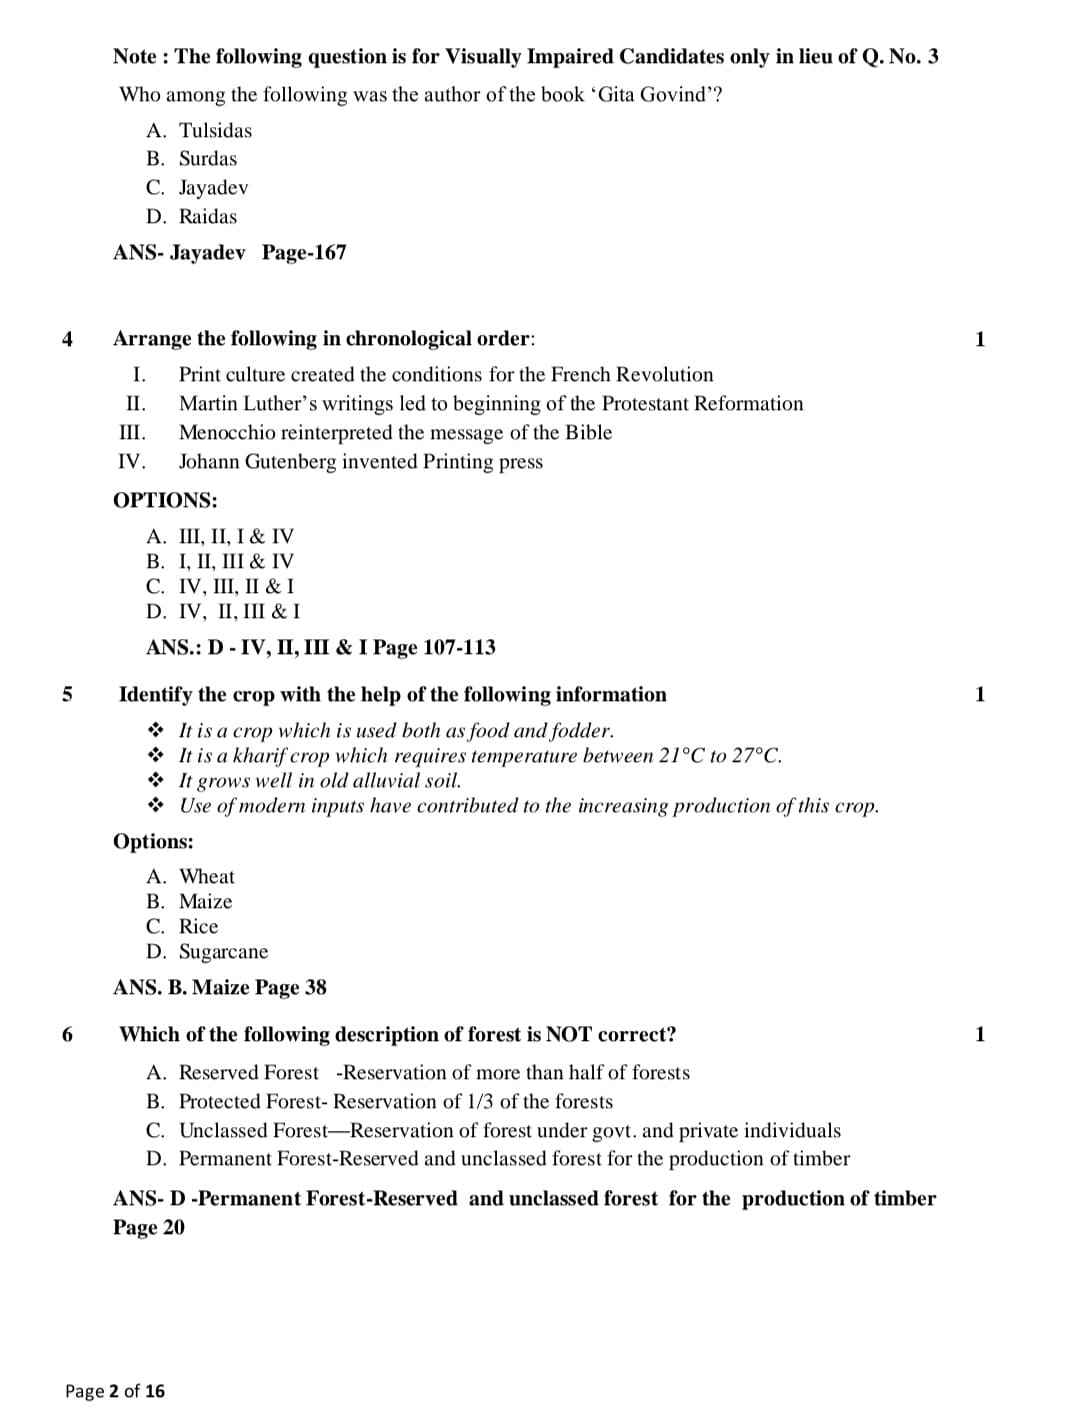 cbse class 10 social science official sample question paper2